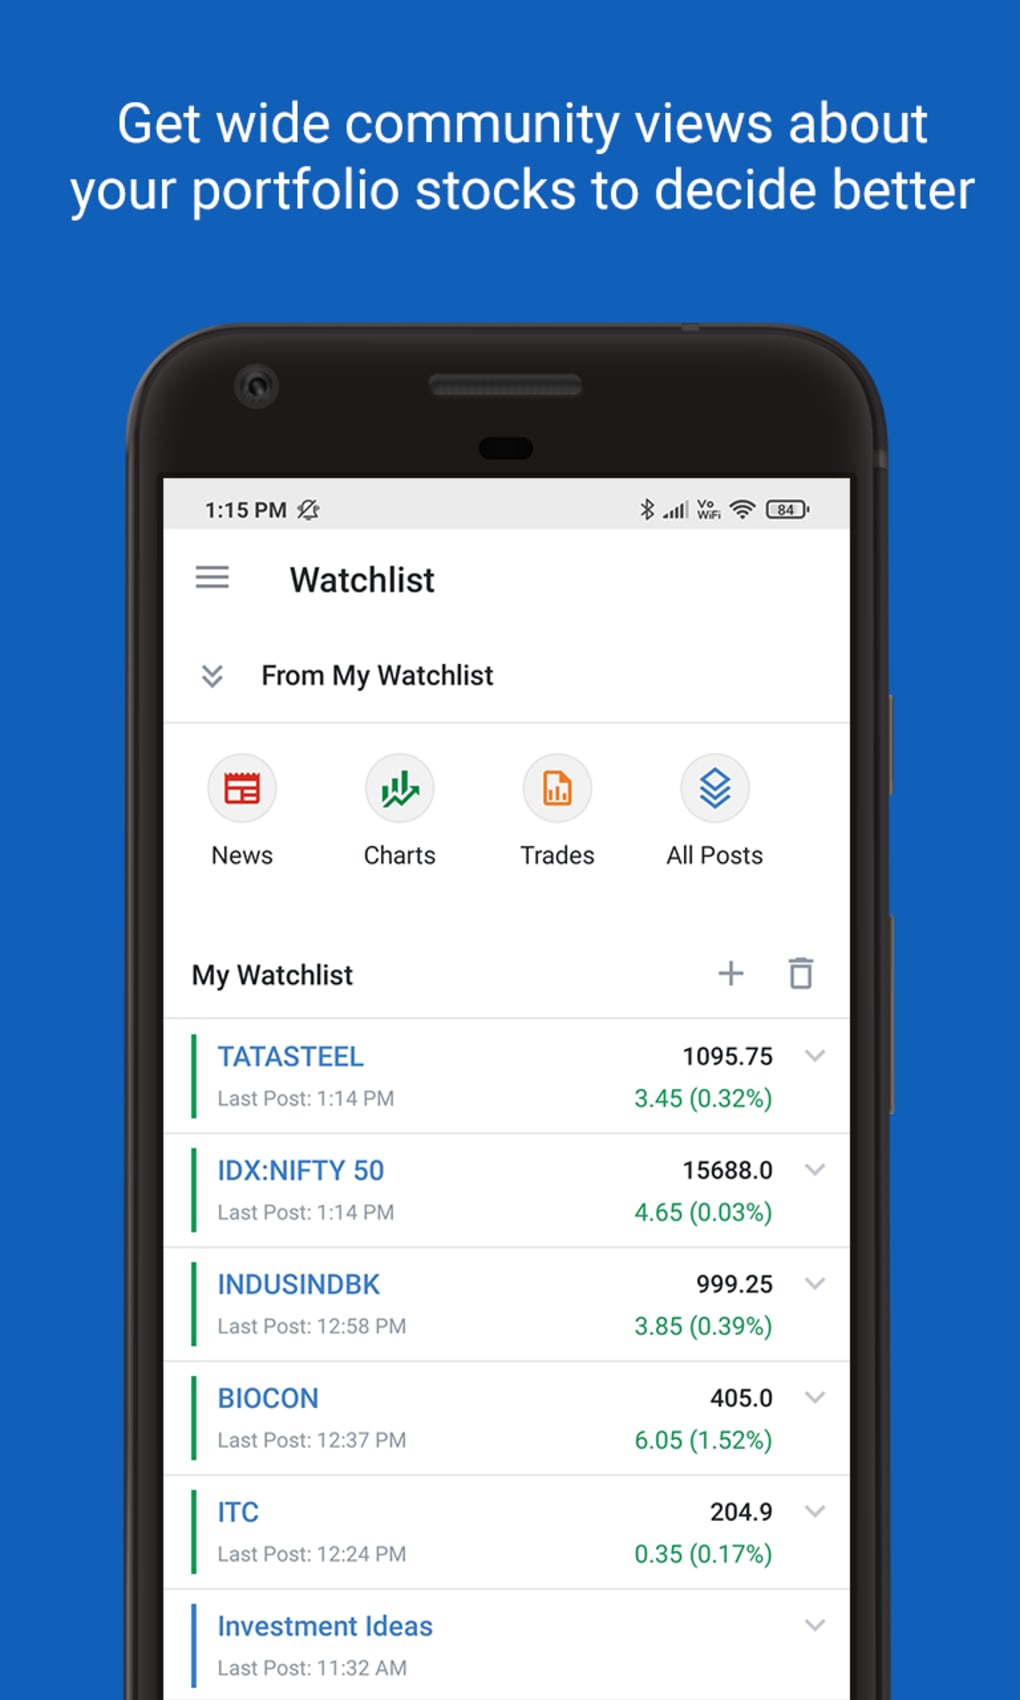 Front Loan for Android - Download the APK from Uptodown